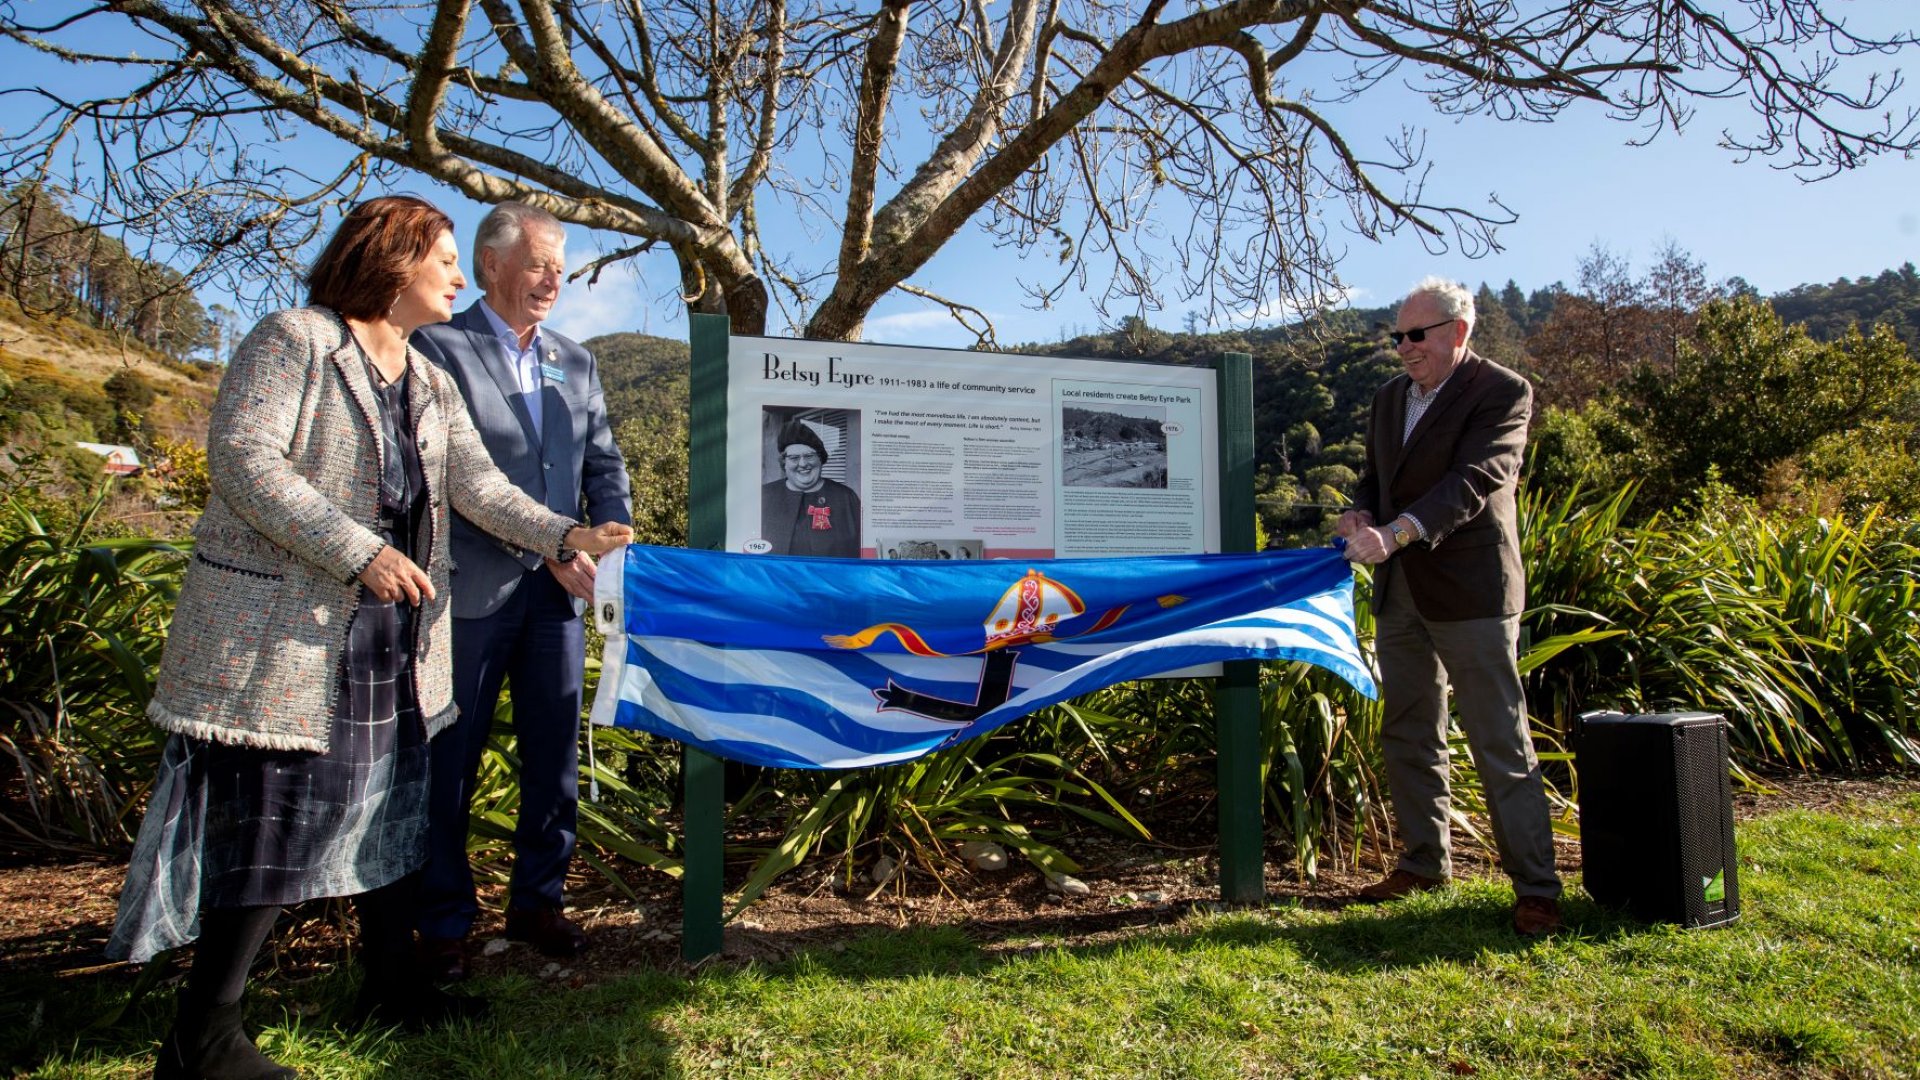 The unveiling of the Betsy Eyre panels at Betsy Eyre Park. Photo Tim Cuff.